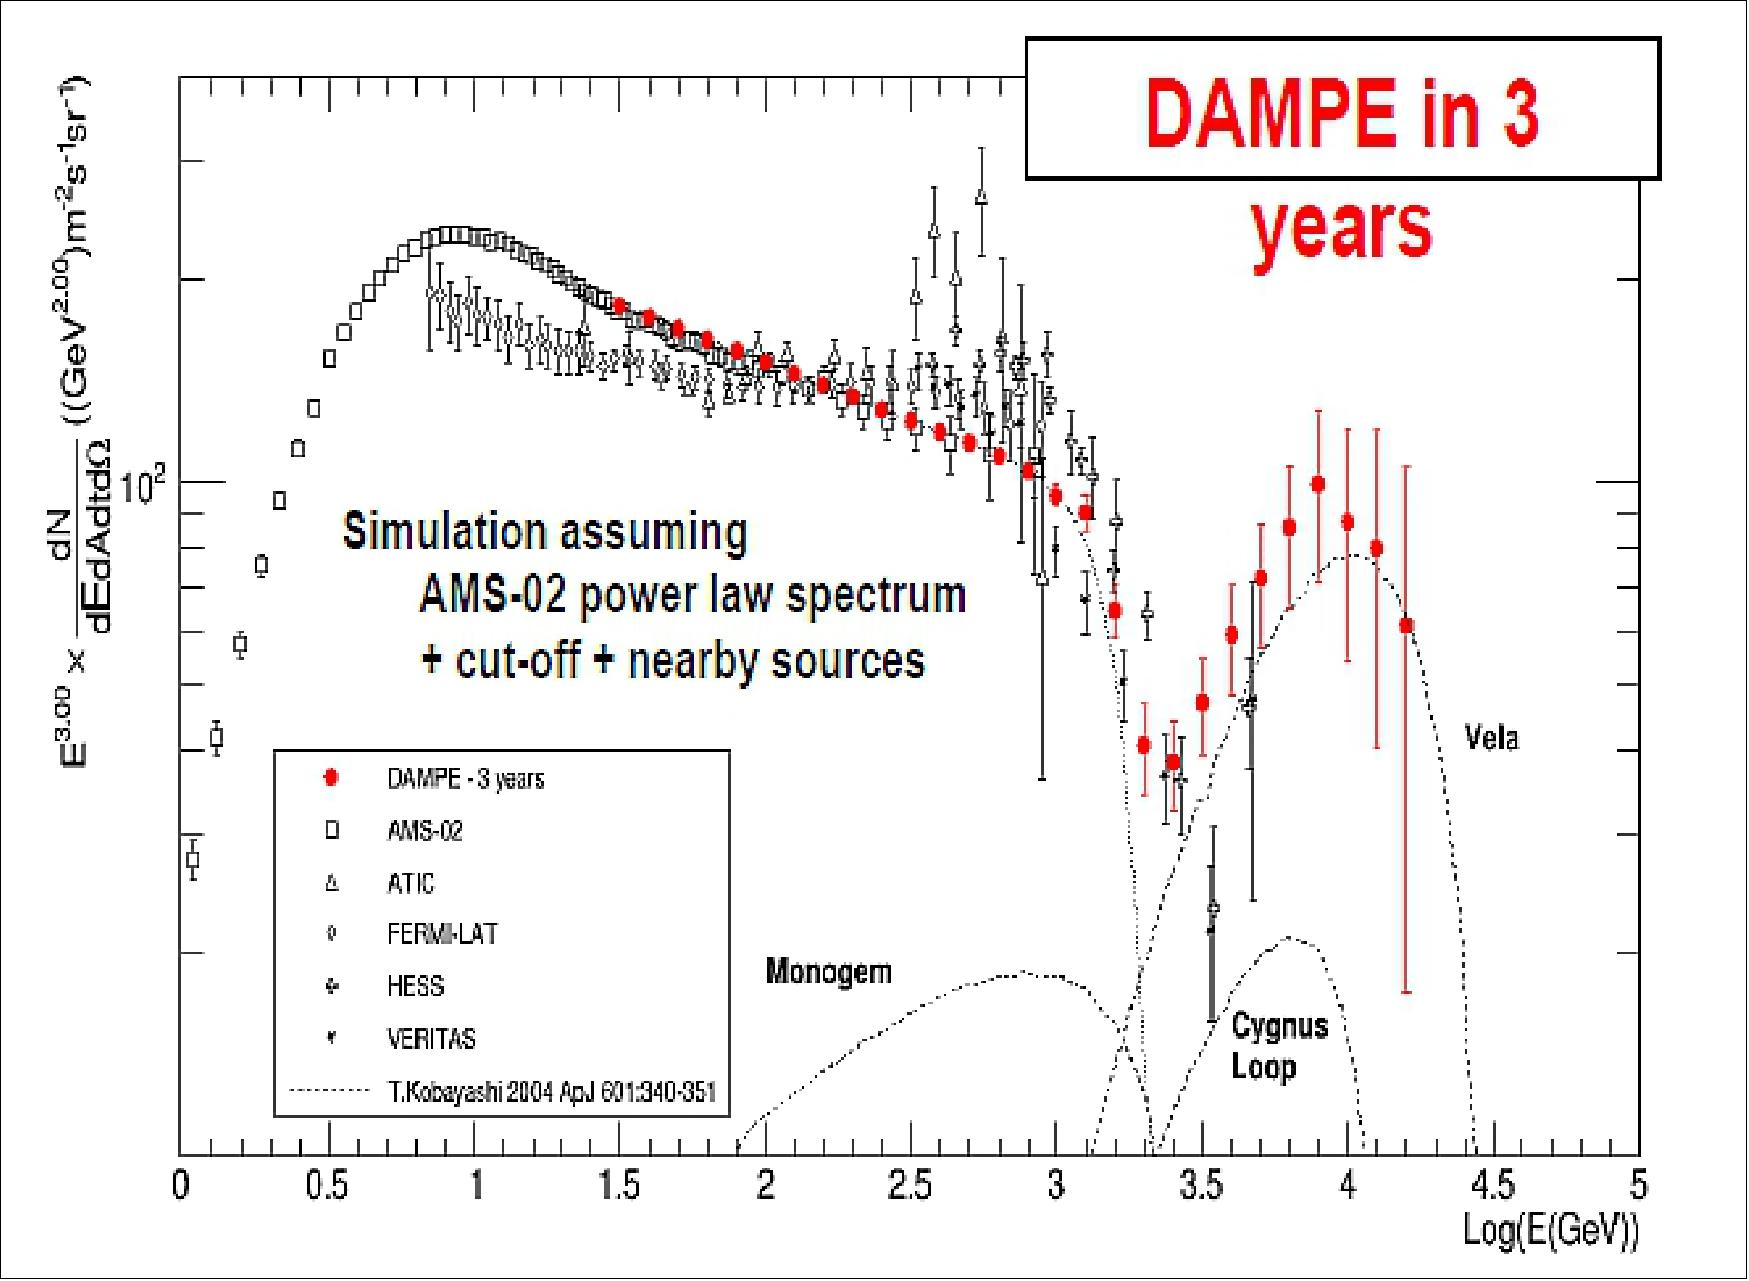 Figure 7: All-electron spectrum. The red dots represent the possible DAMPE measurements in 3 years assuming the power law suggested by the AMS-02 experiment, a cut-off at ~ 1 TeV and nearby astrophysical sources (image credit: DAMPE collaboration)